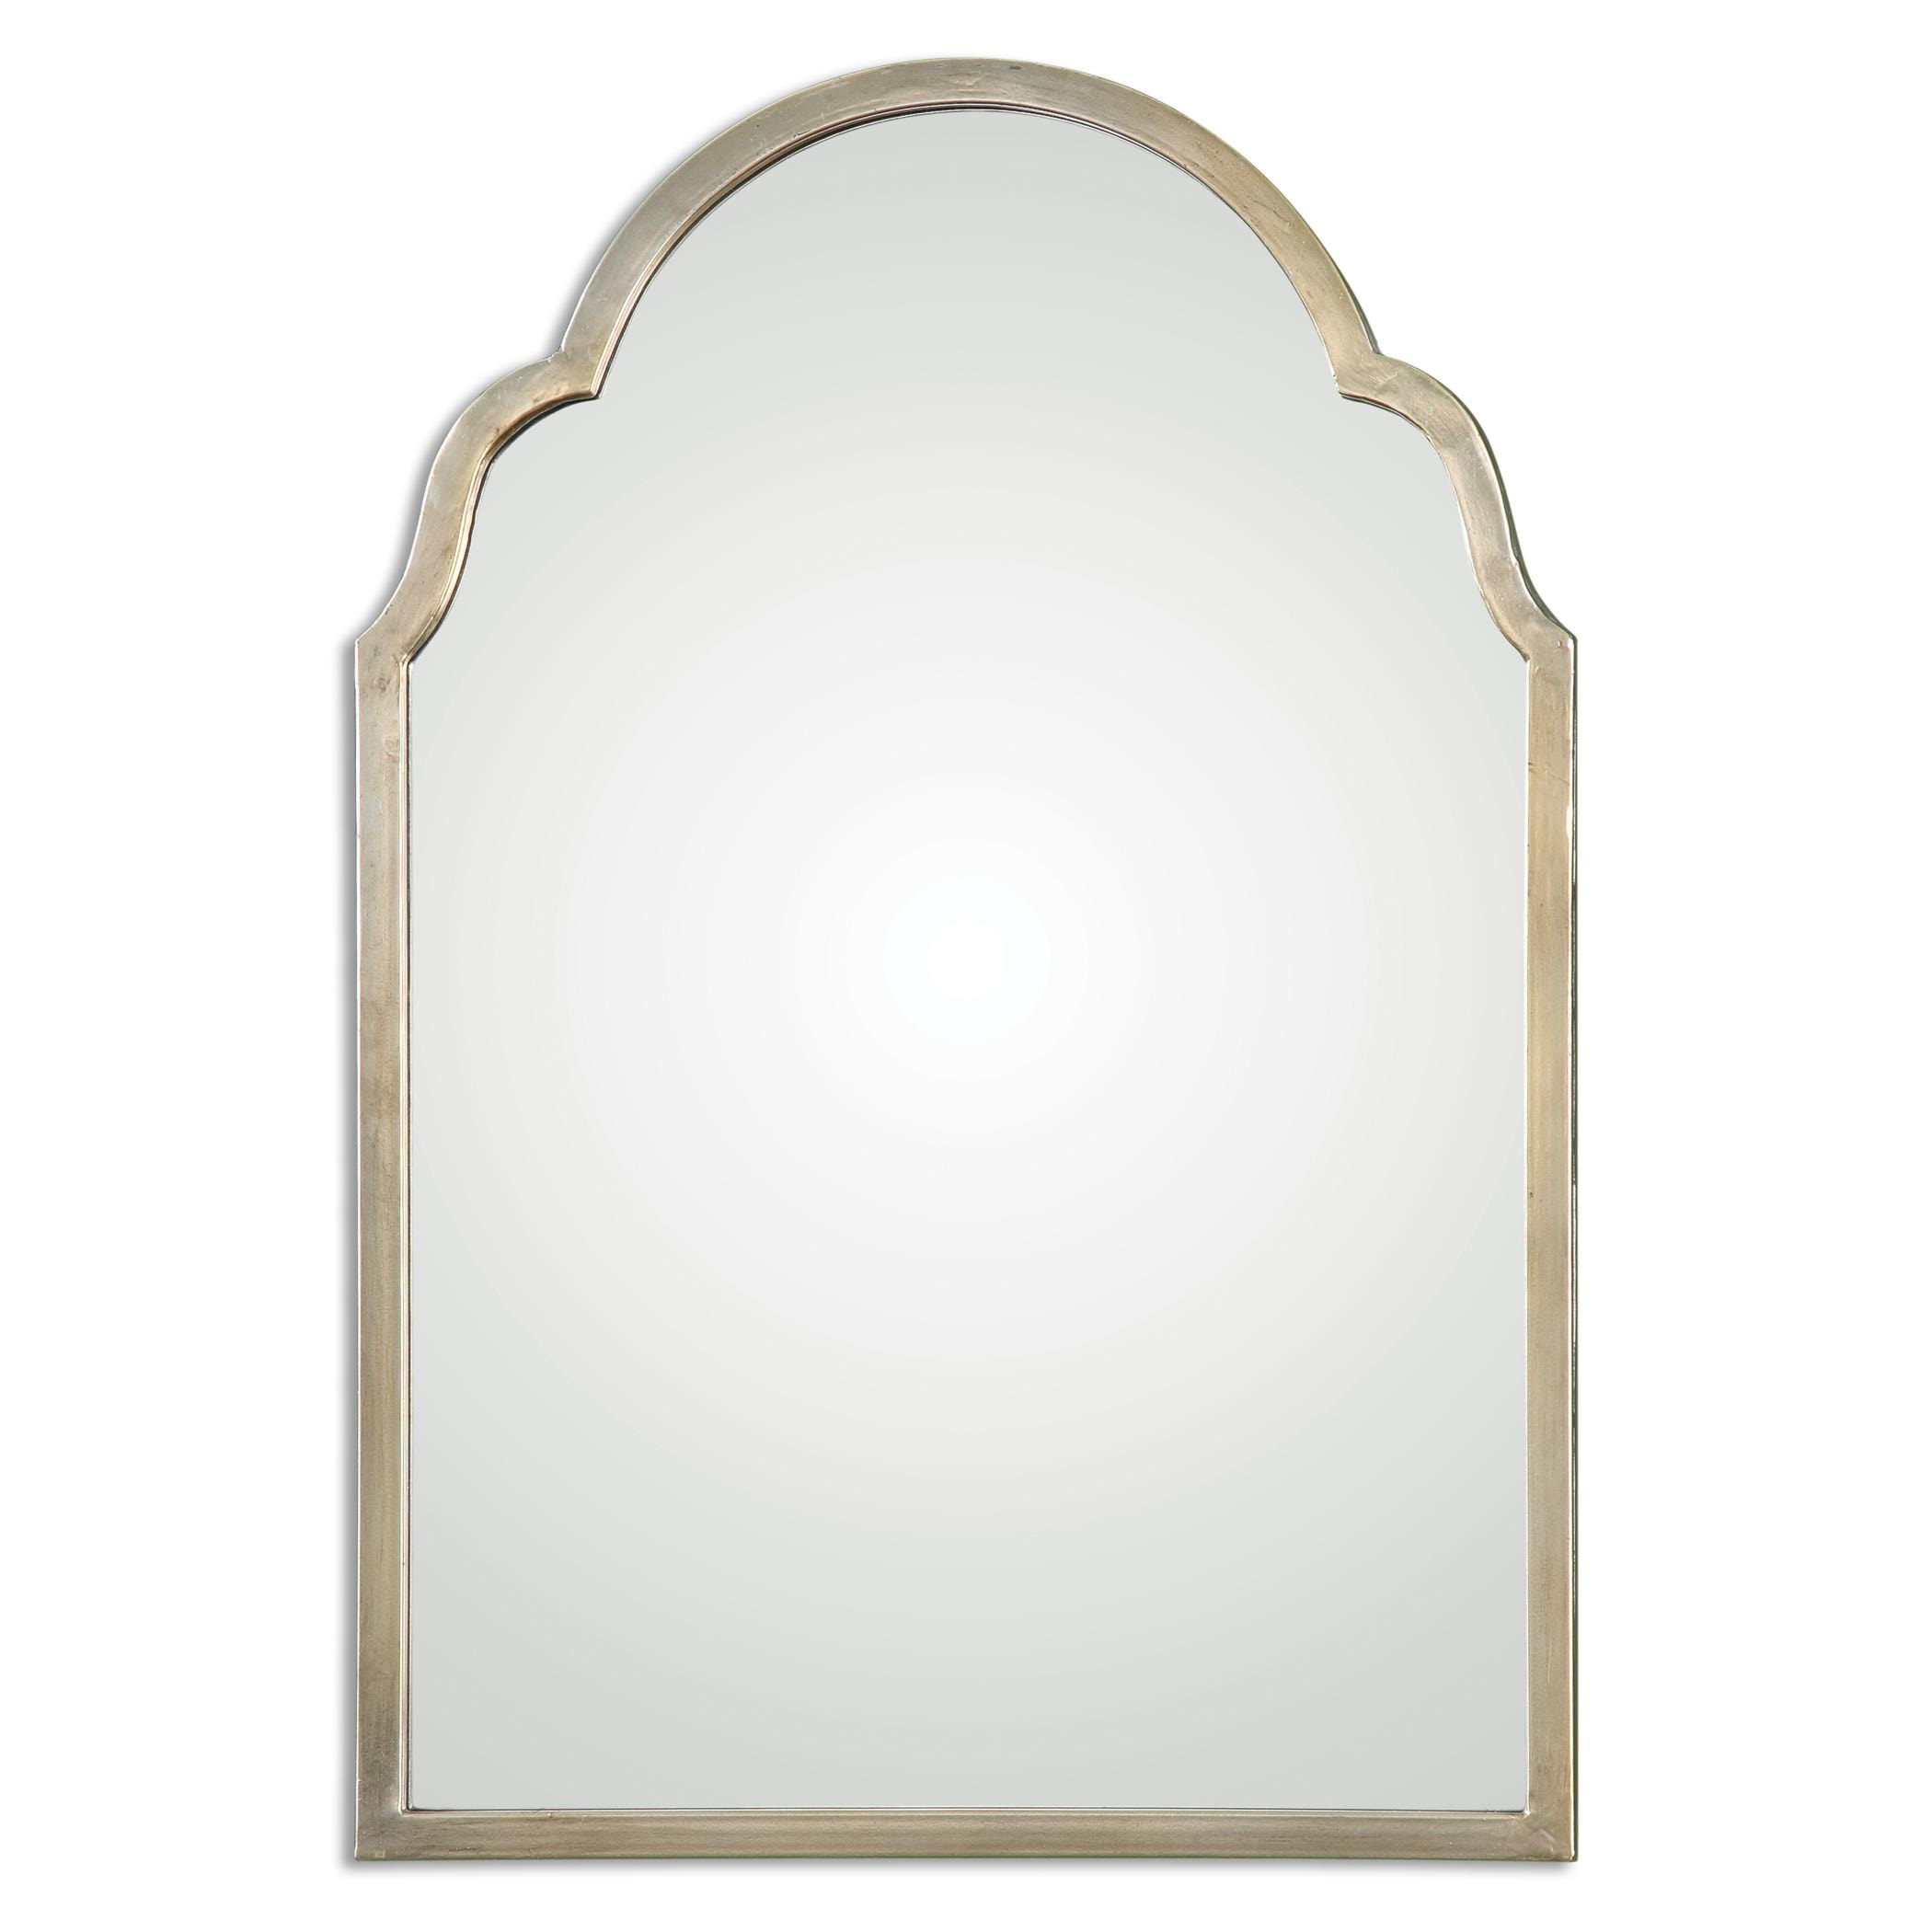 Uttermost Arched Mirrors Brayden Petite Silver Arch Mirror Adcock  Furniture Mirrors Wall